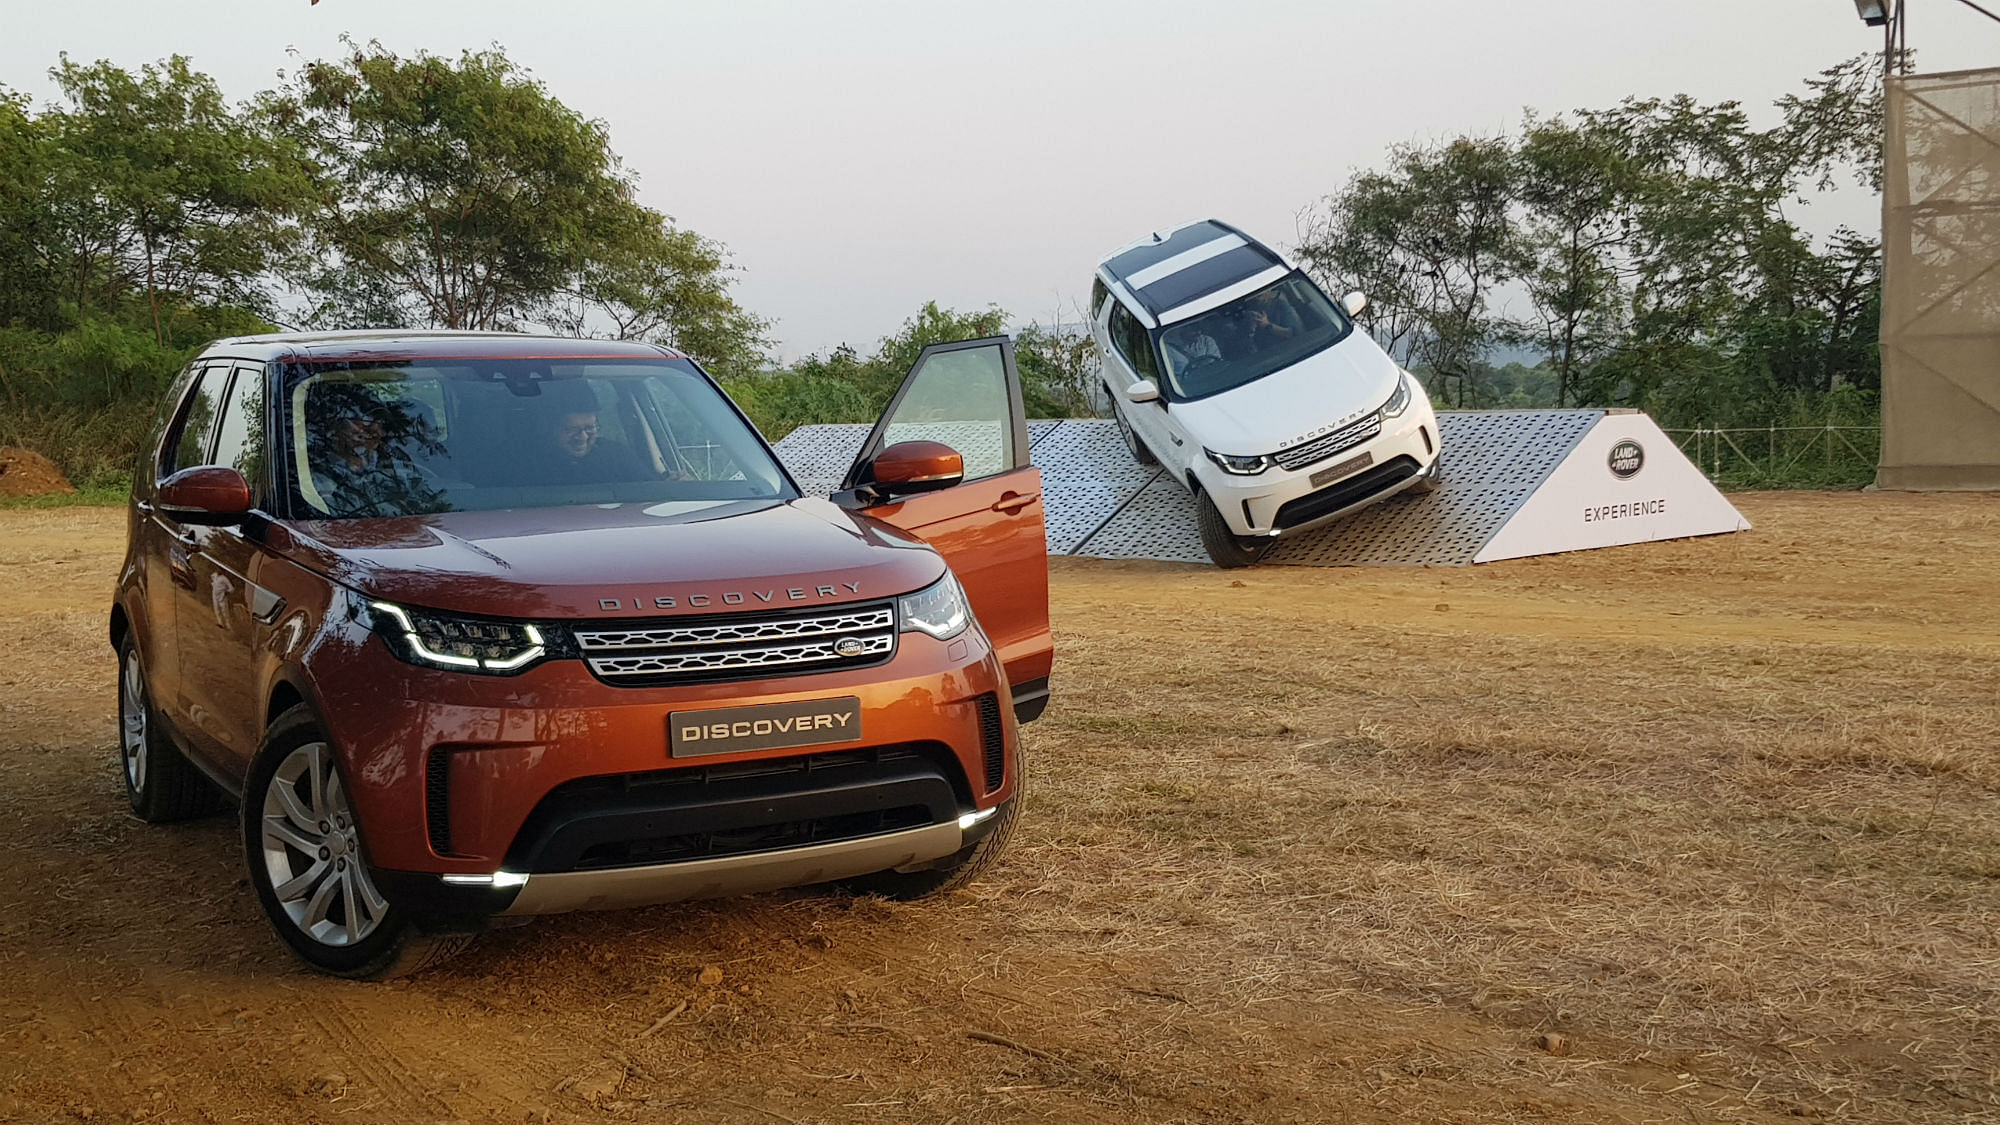 The new Jaguar Land Rover Discovery is here in India.&nbsp;